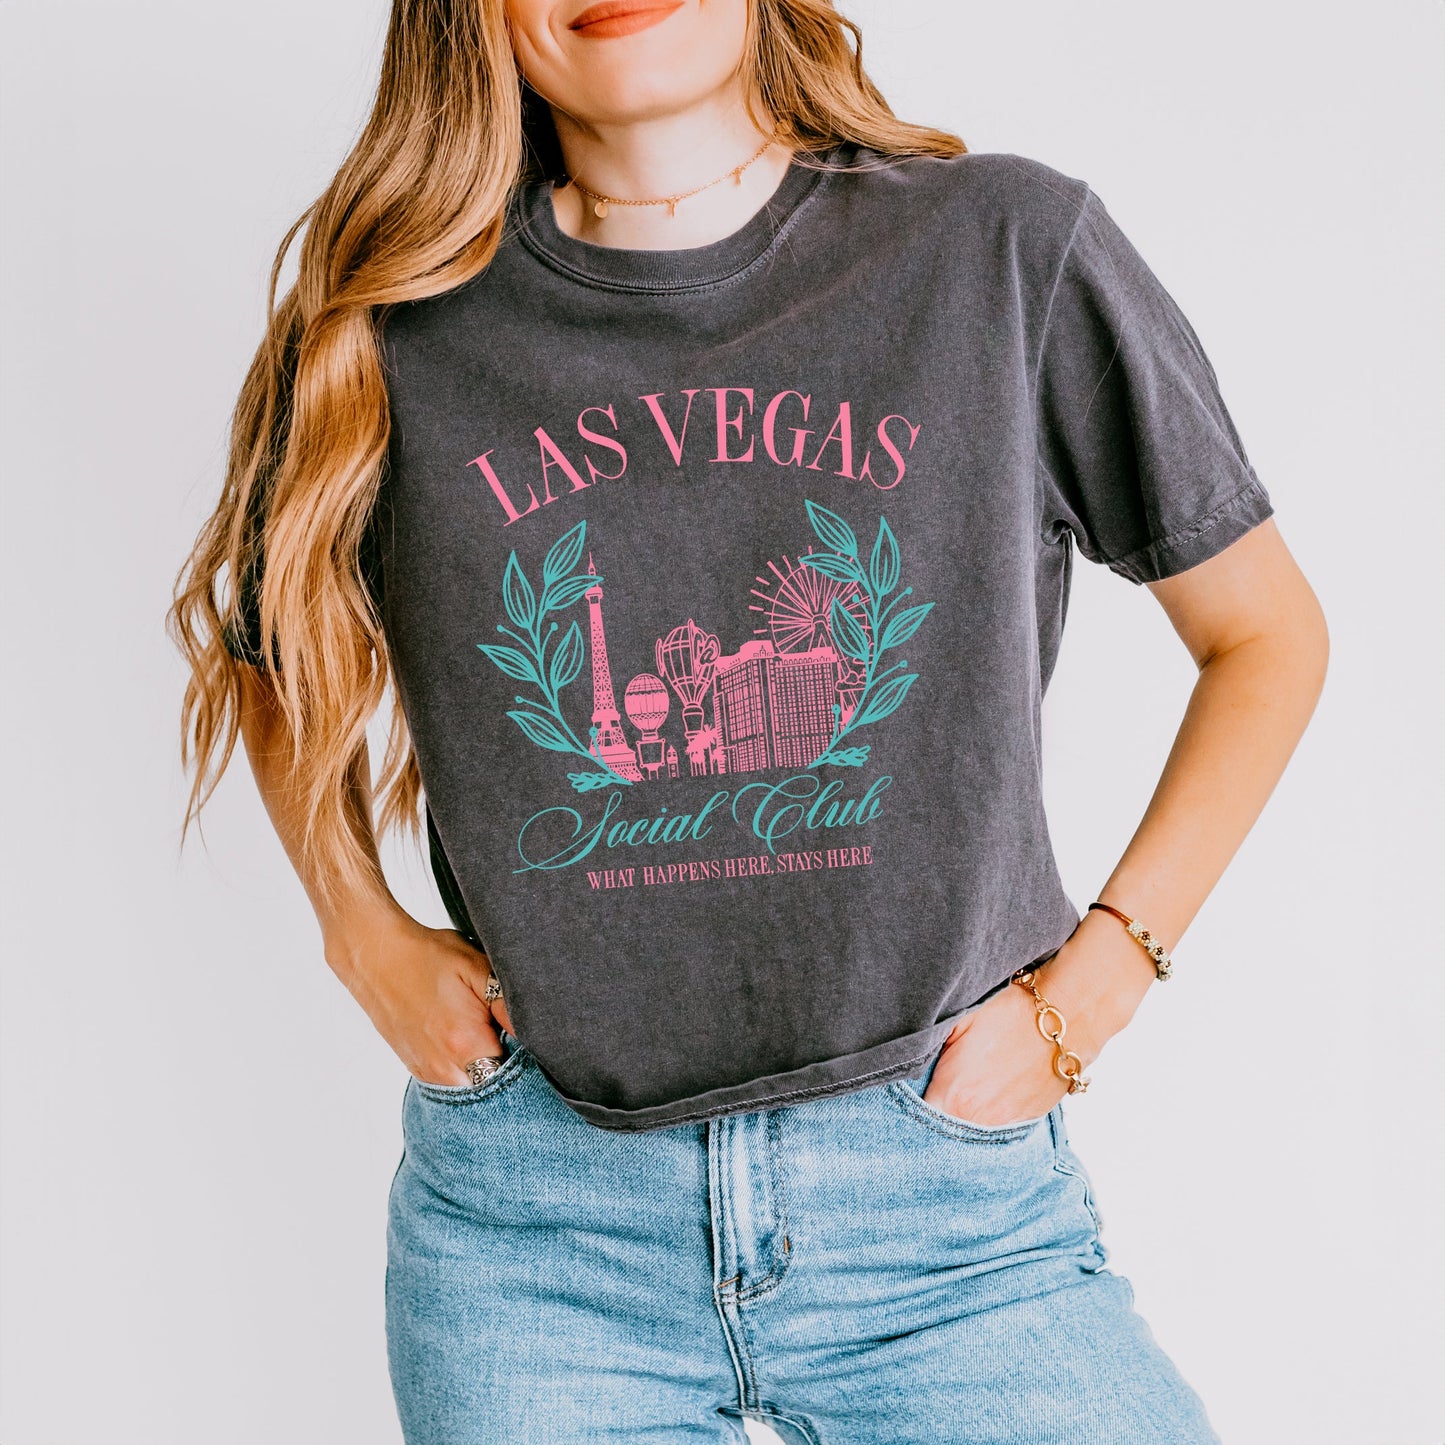 Las Vegas Social Club | Relaxed Fit Cropped Tee